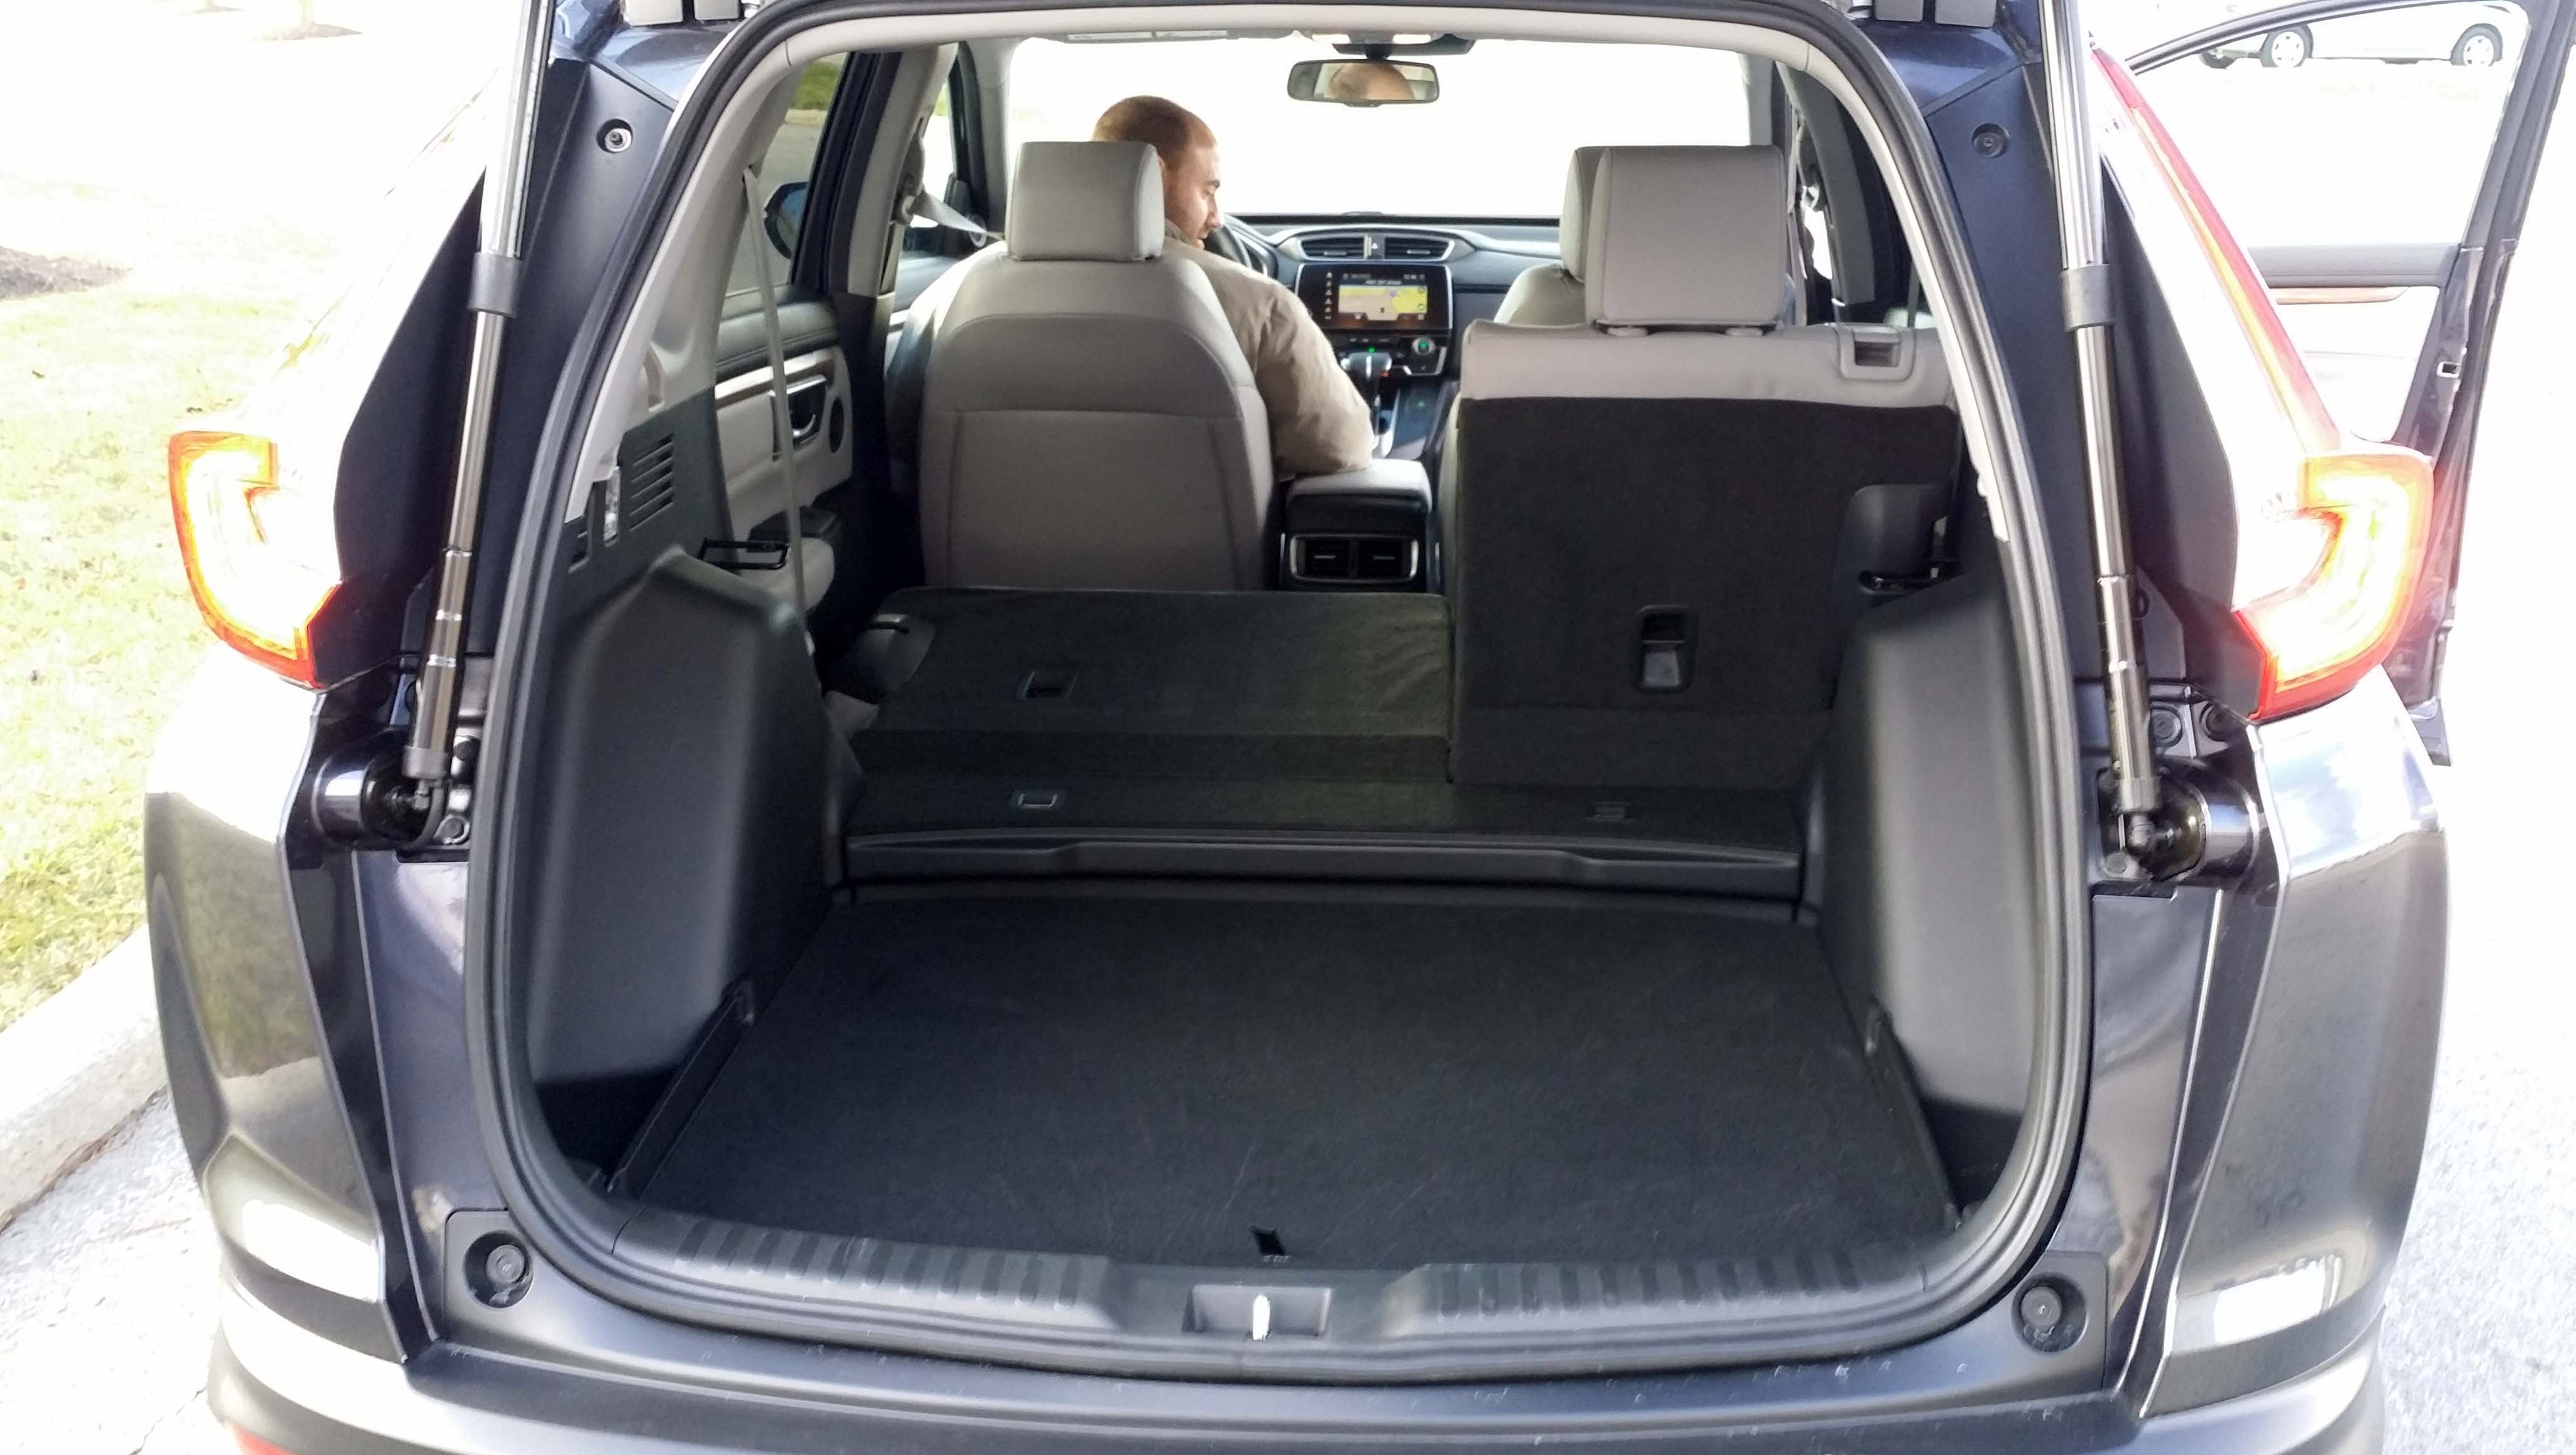 The new, 2017 Honda CR-V comes equipped with rear seats that fold flat and a "shelf" rear storage compartment.